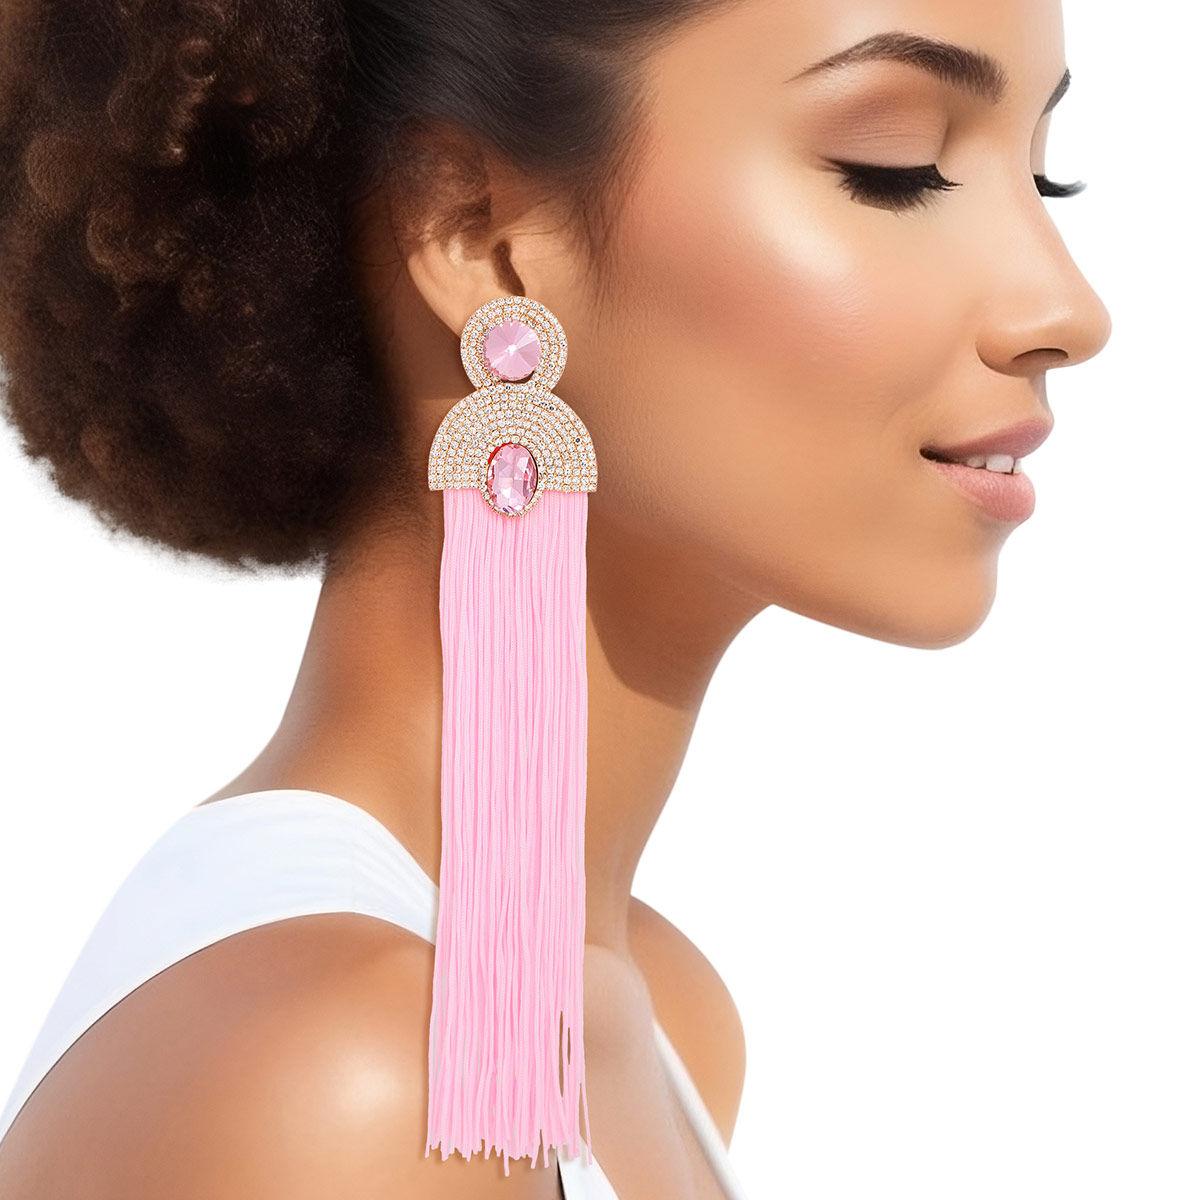 Style Staple Pink Fringe Statement Earrings for Glamour